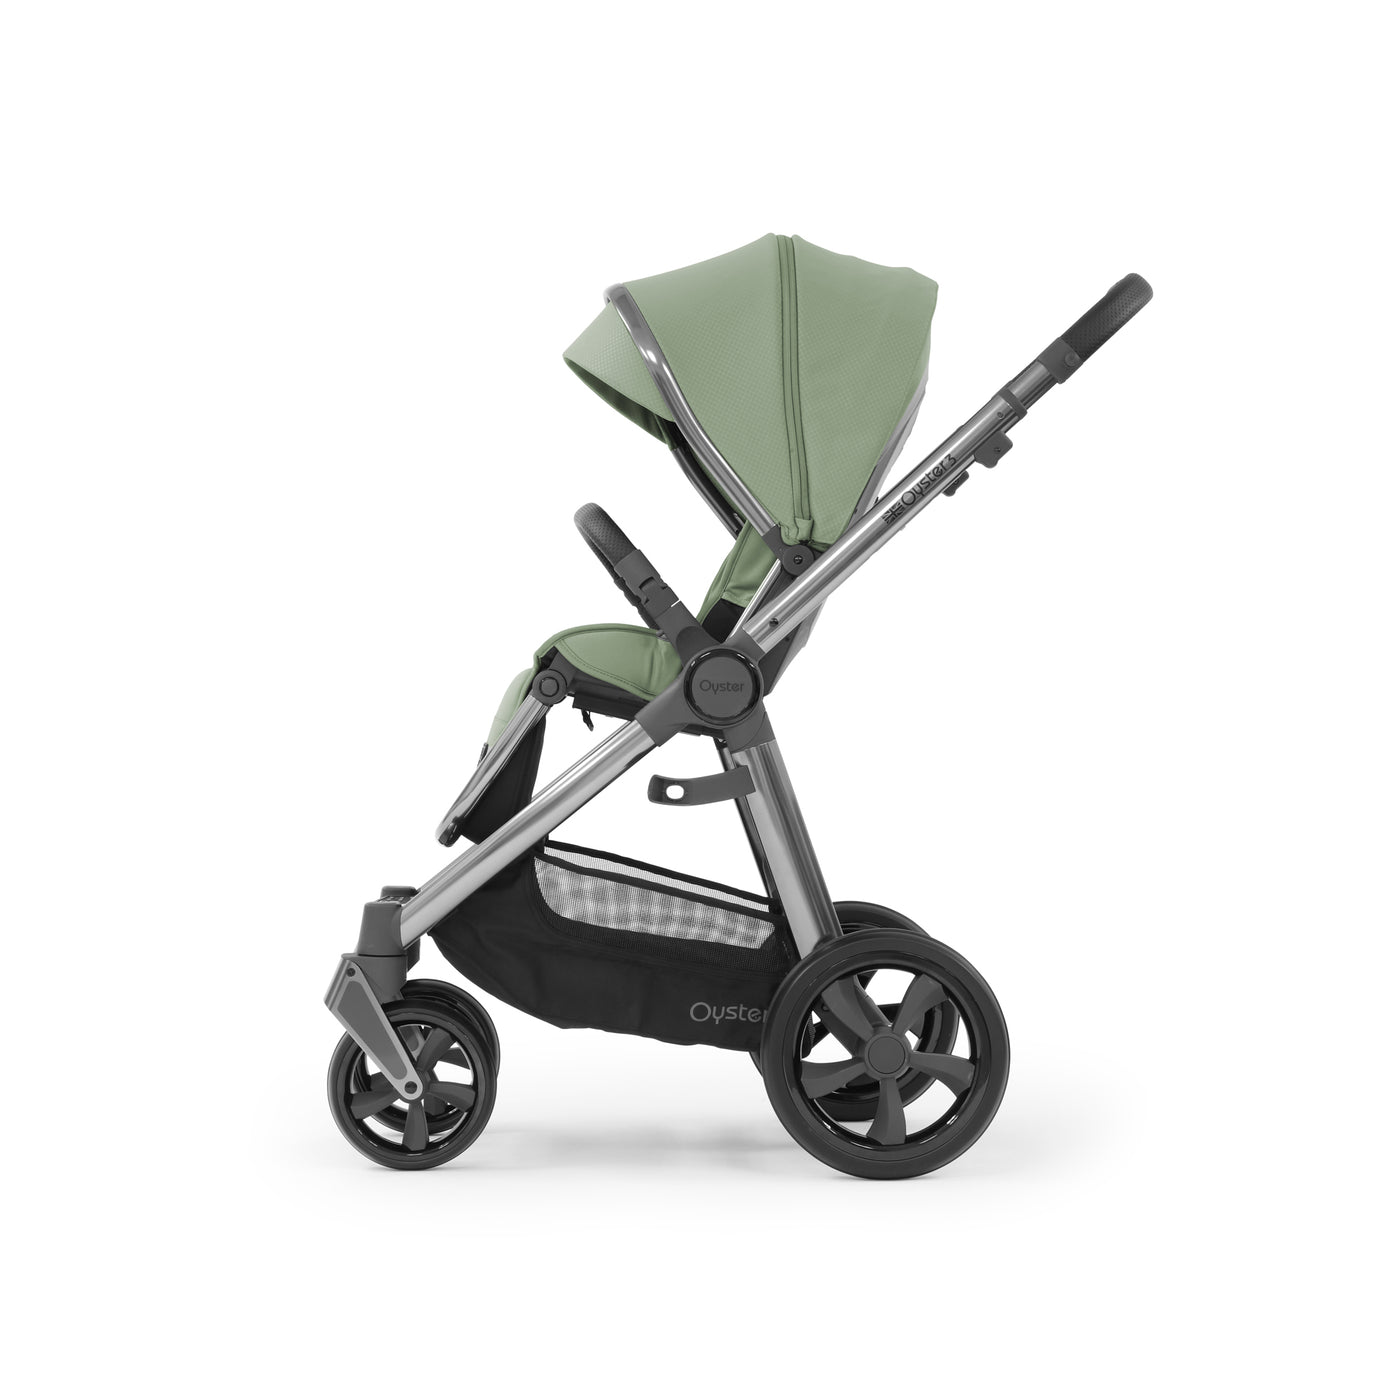 Babystyle Oyster 3 Essential Bundle with Maxi-Cosi Pebble 360 Pro & Base - Spearmint